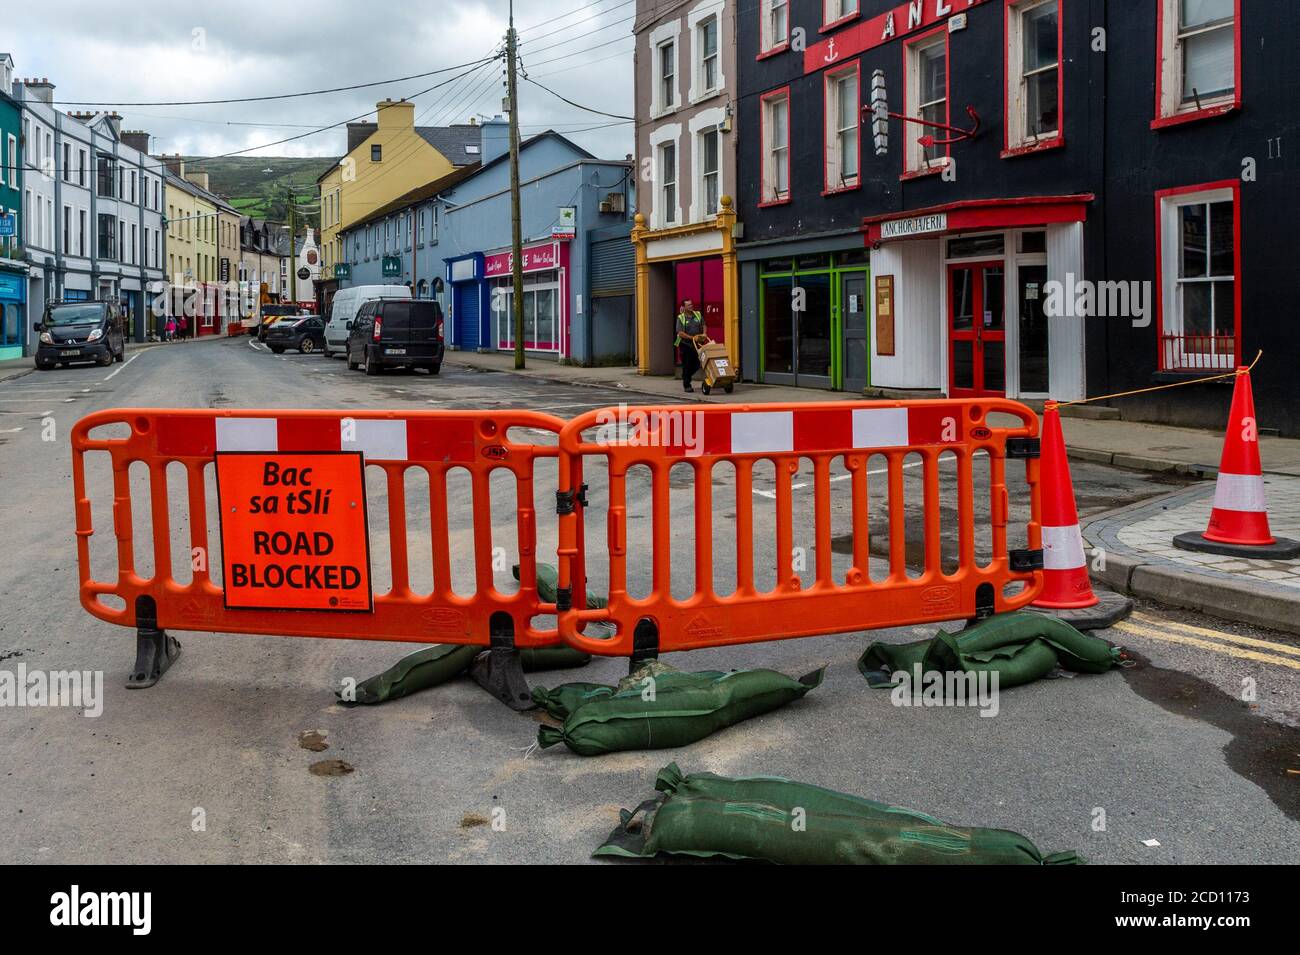 Bantry, West Cork, Ireland. 25th Aug, 2020. Bantry town was the victim of major floods last night with at least 50 homes and businesses suffering significant water and mud damage. The floods happened during a 4 hour deluge of rain. The force of the water ripped up part of the road in New Street. Cork County Council is pictured making emergency repairs to the road. Credit: AG News/Alamy Live News Stock Photo